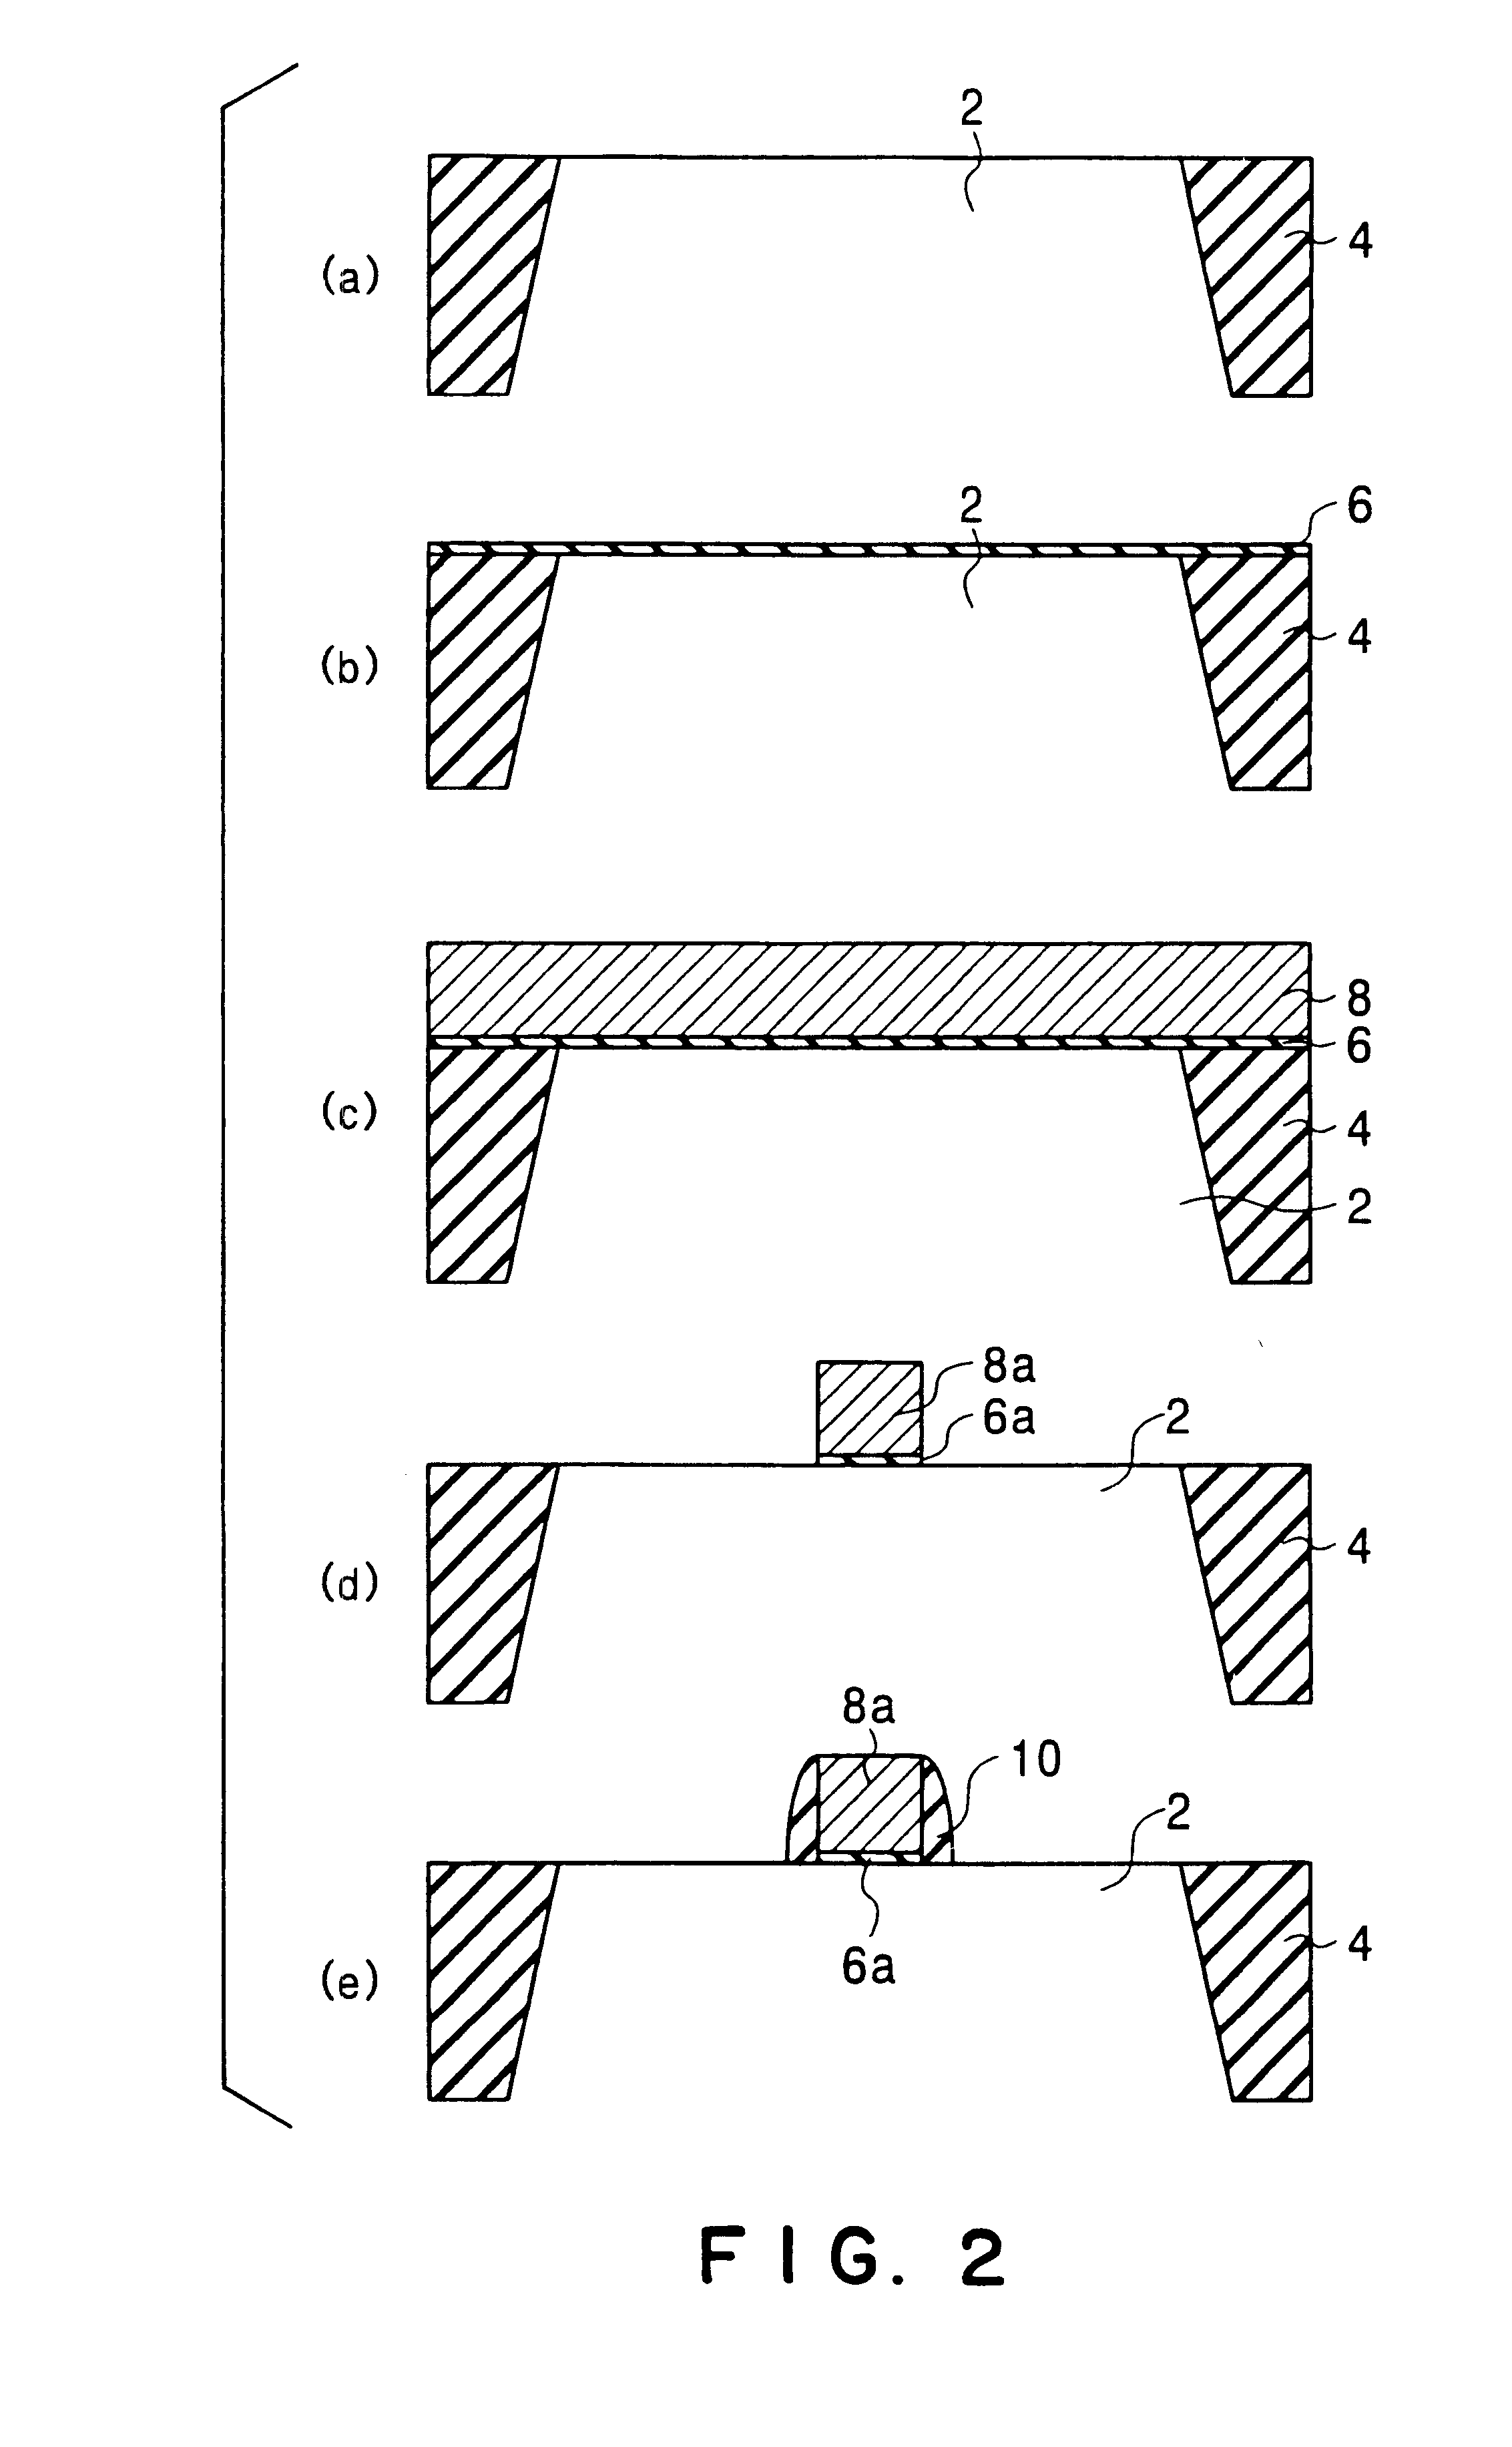 Semiconductor device having diffusion regions with different junction depths